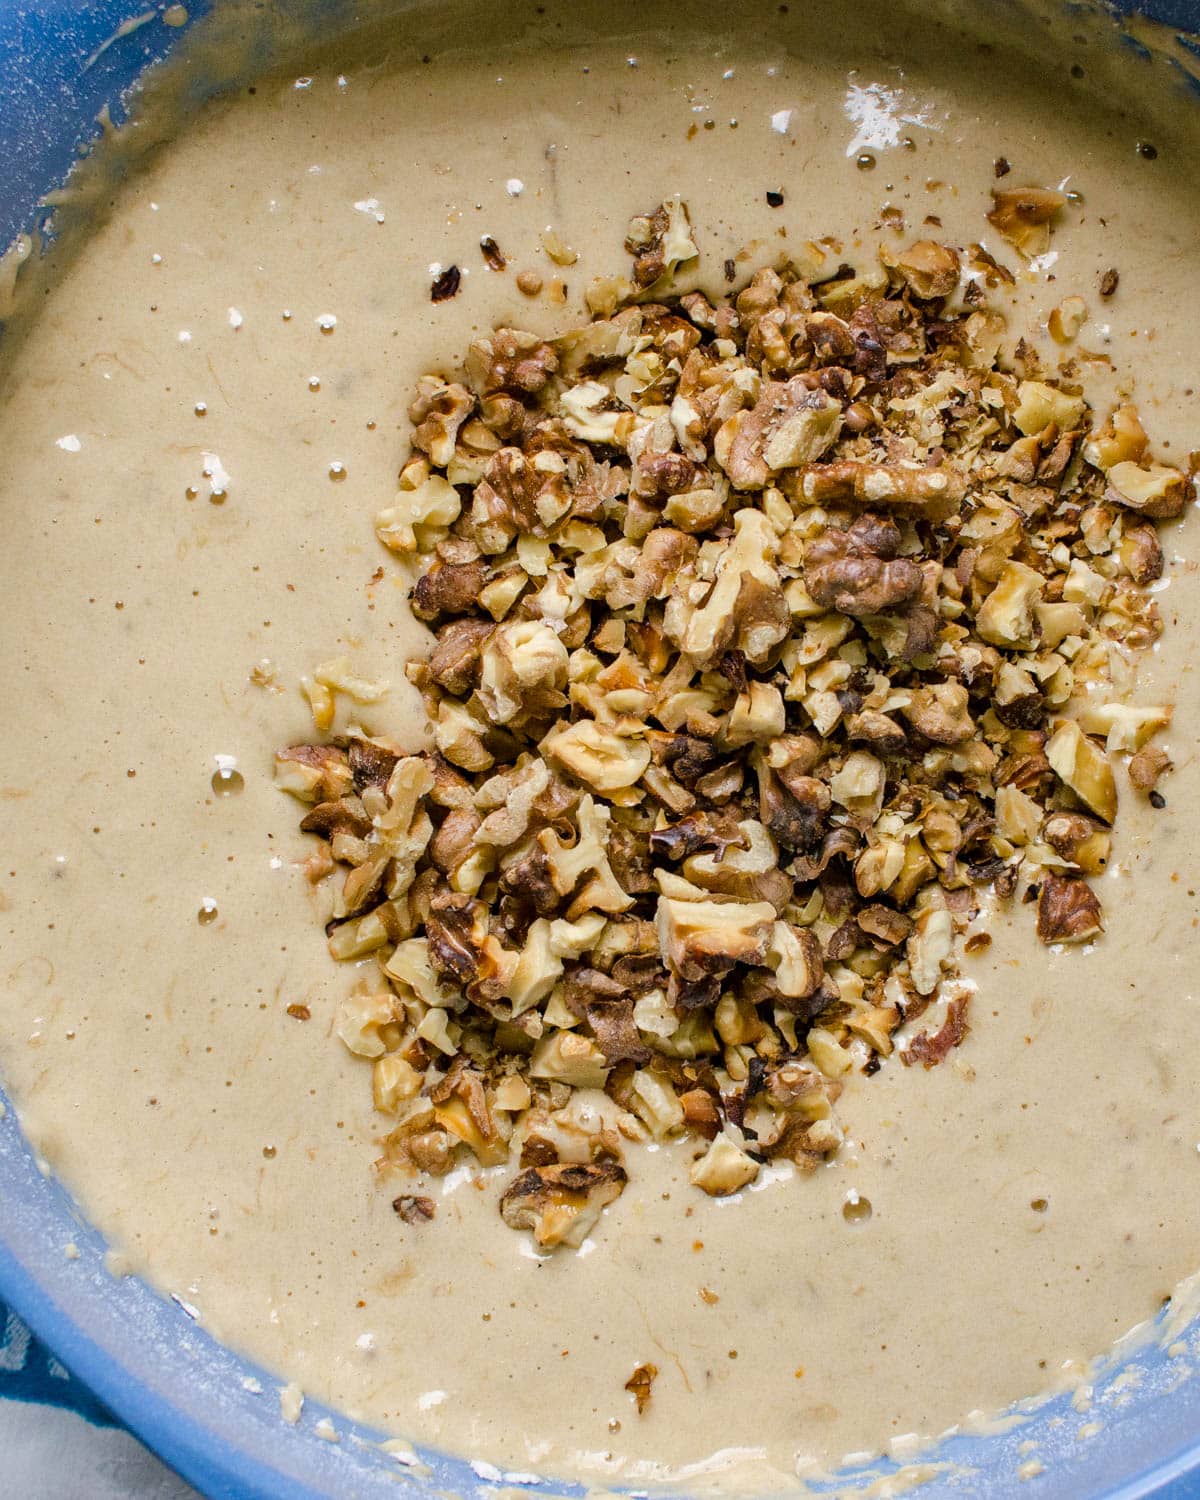 adding toasted walnuts to the banana bread batter.